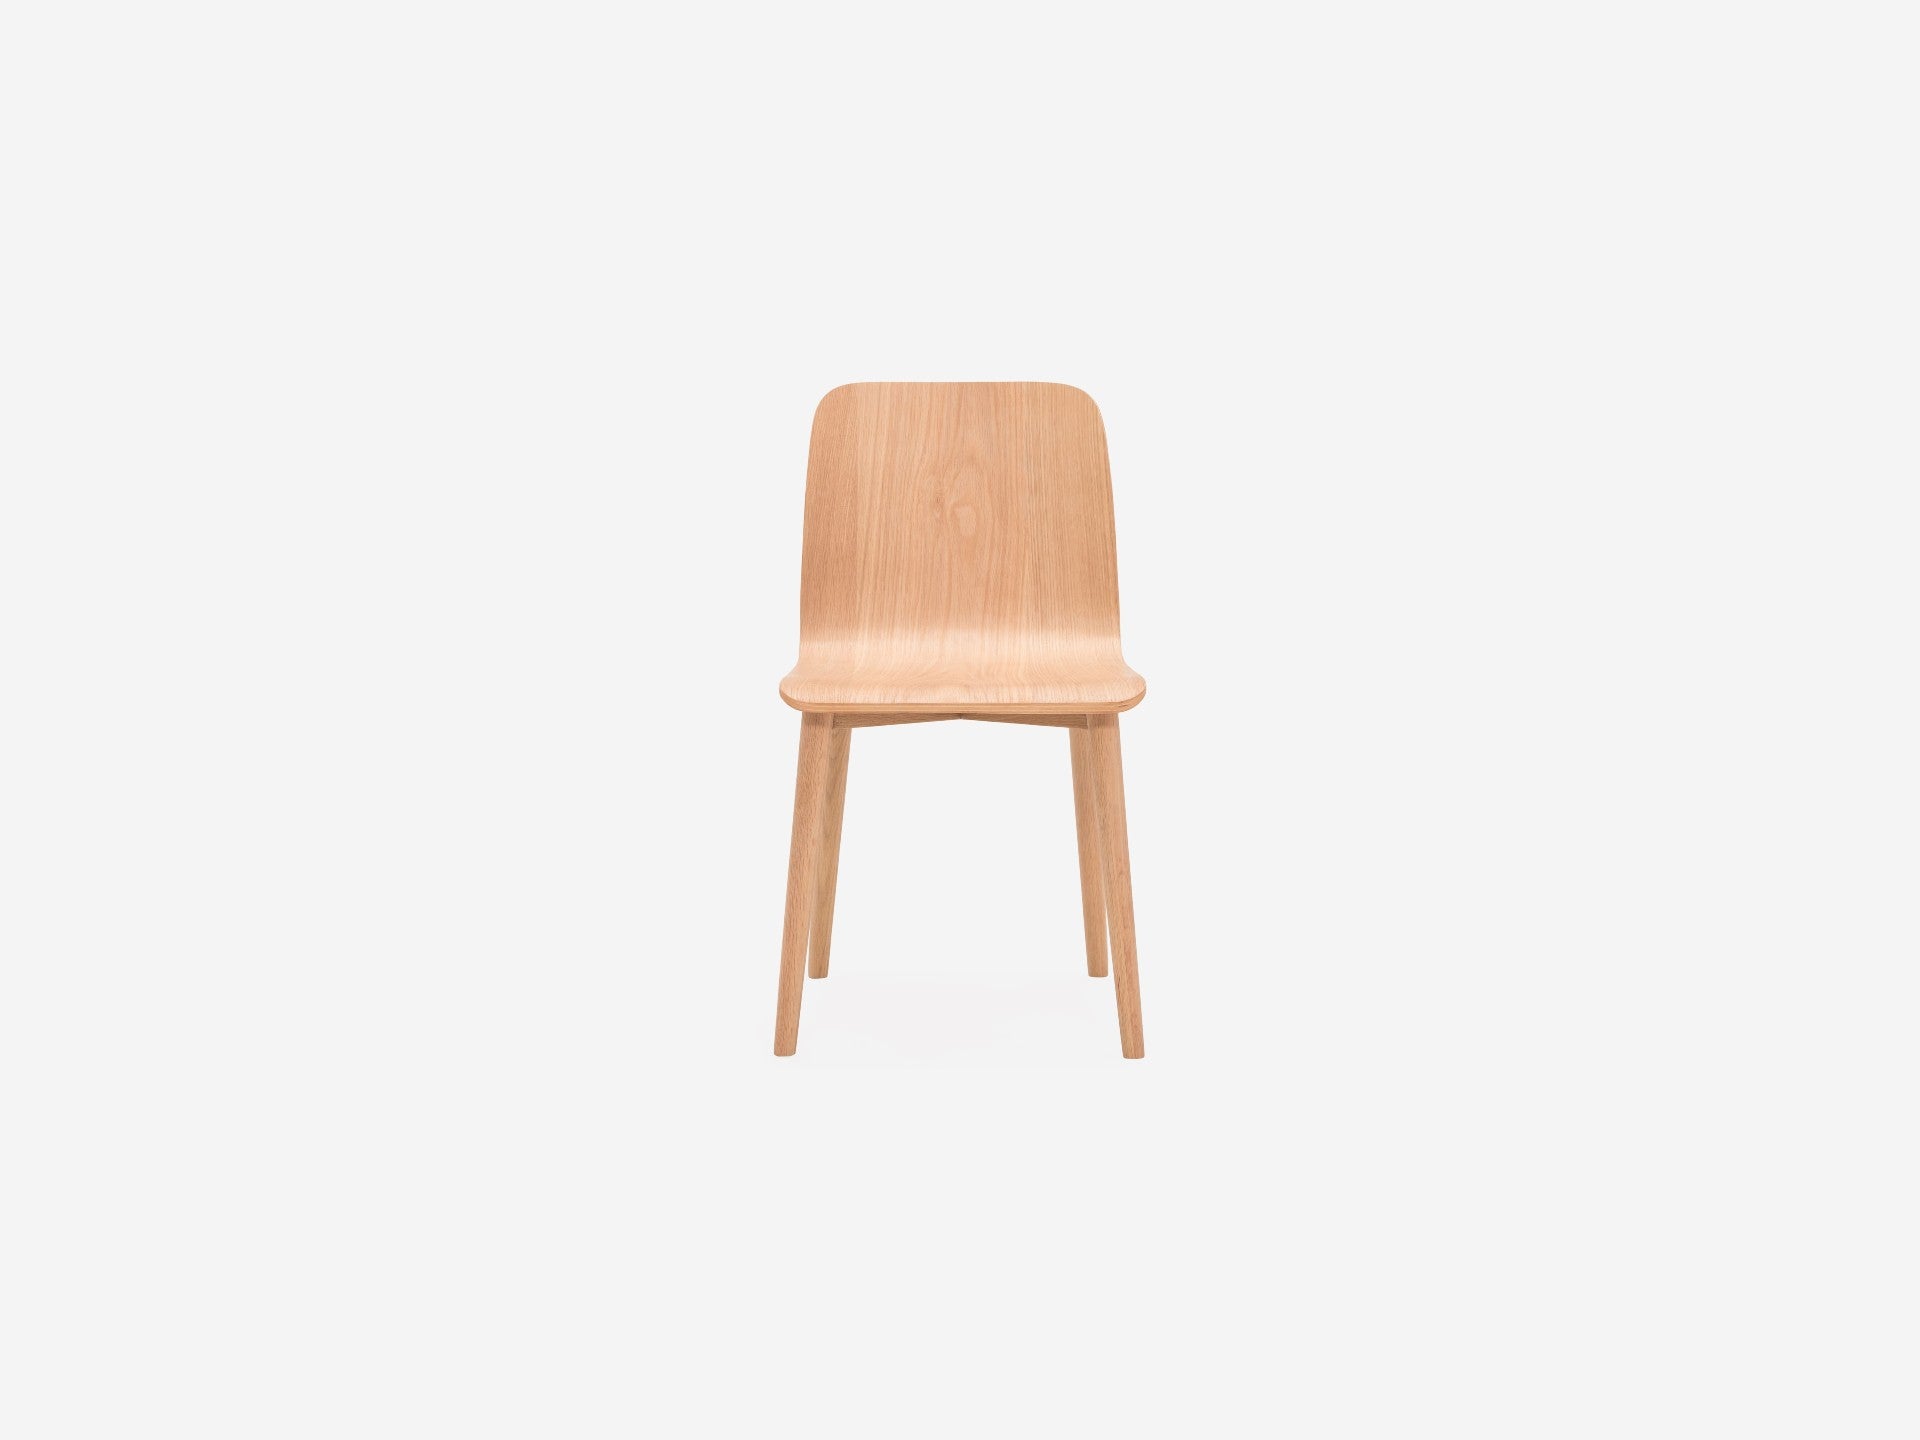 Tami Dining Chair